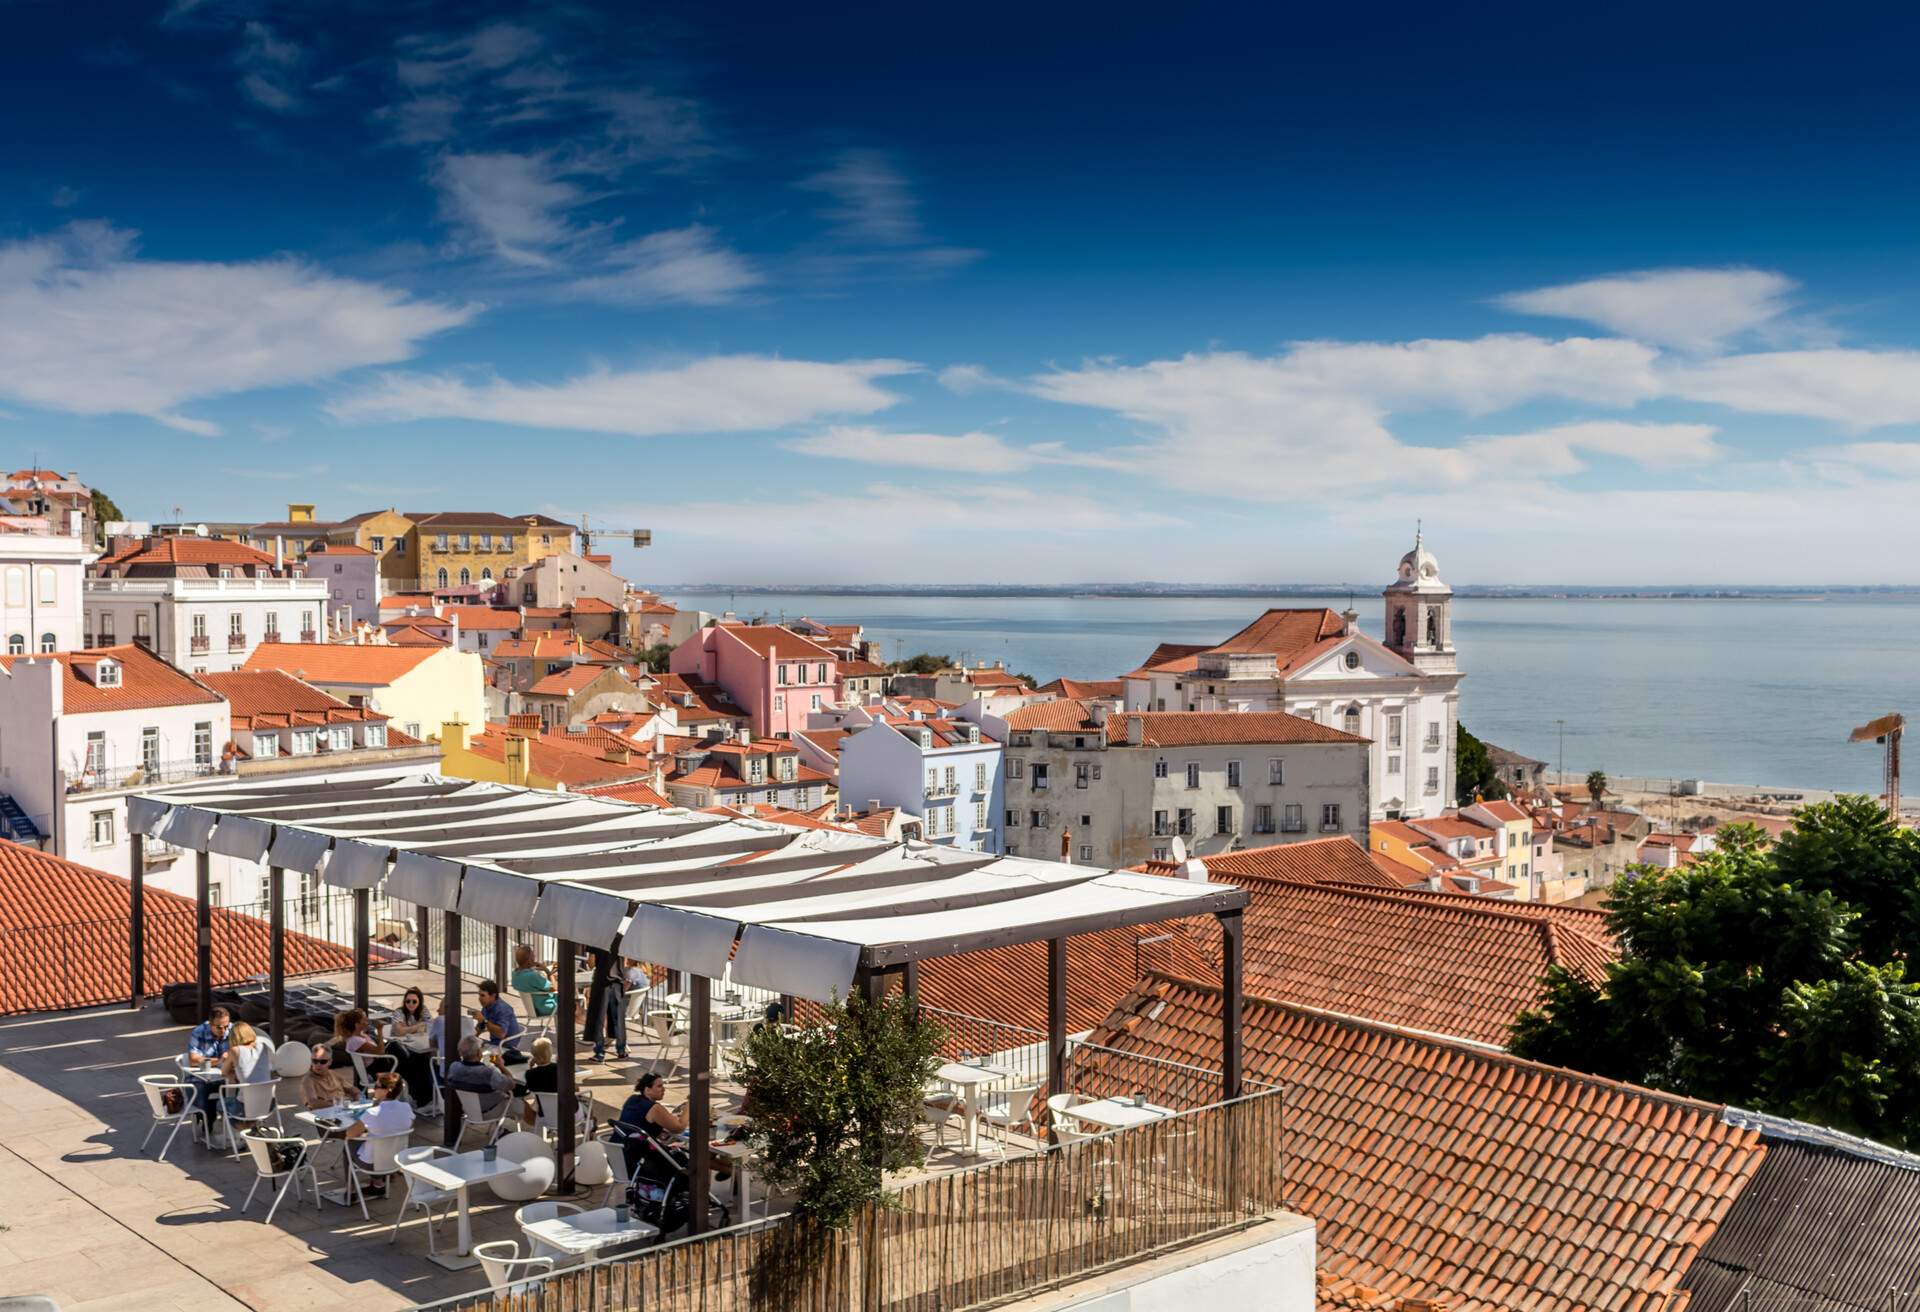 DEST_PORTUGAL_LISBON_VIEWPOINT-CAFE-BAR_GettyImages-713879655